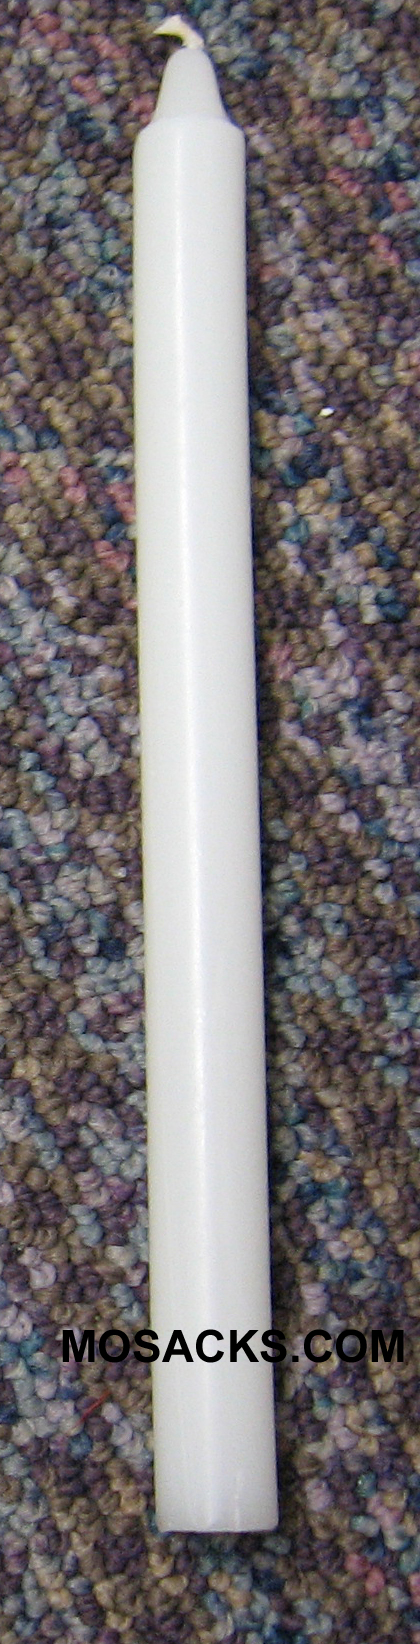 Cathedral Candle 17/32" x 7" white Stearine Votive Candles are used for ceremonies and vigils Votive 18's memorial service candles or memorial candles.